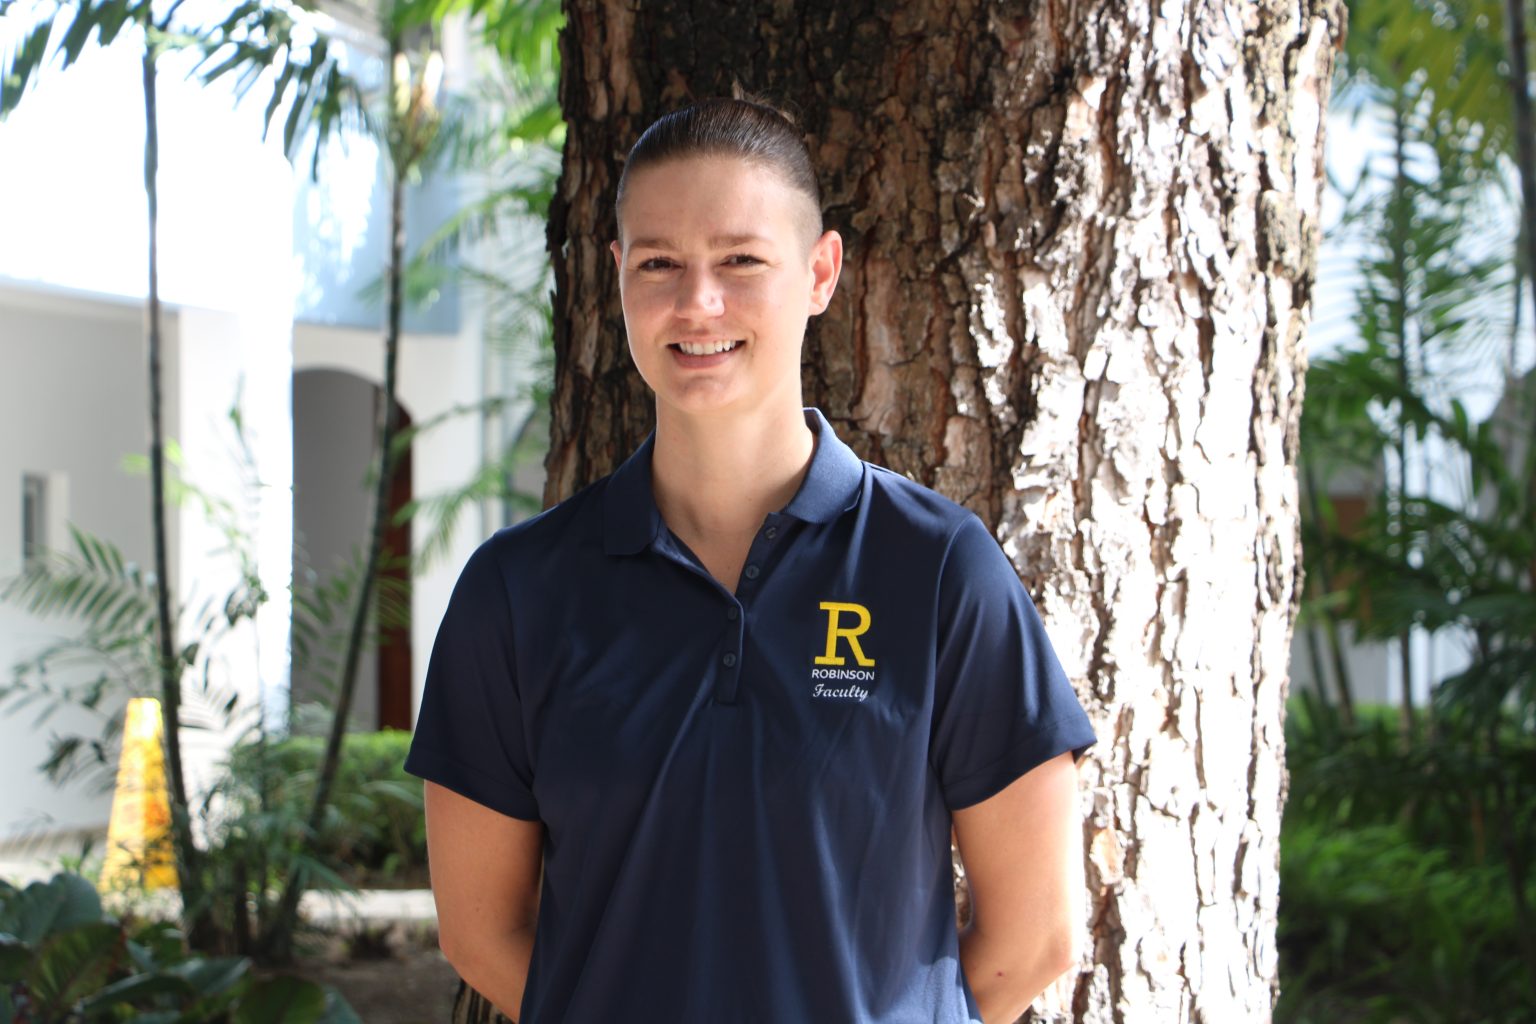 Elementary School Dean of Students Shaina Sullivan stands while wearing a navy blue polo shirt with the yellow Robinson R on the right hand side and with a tree behind her.